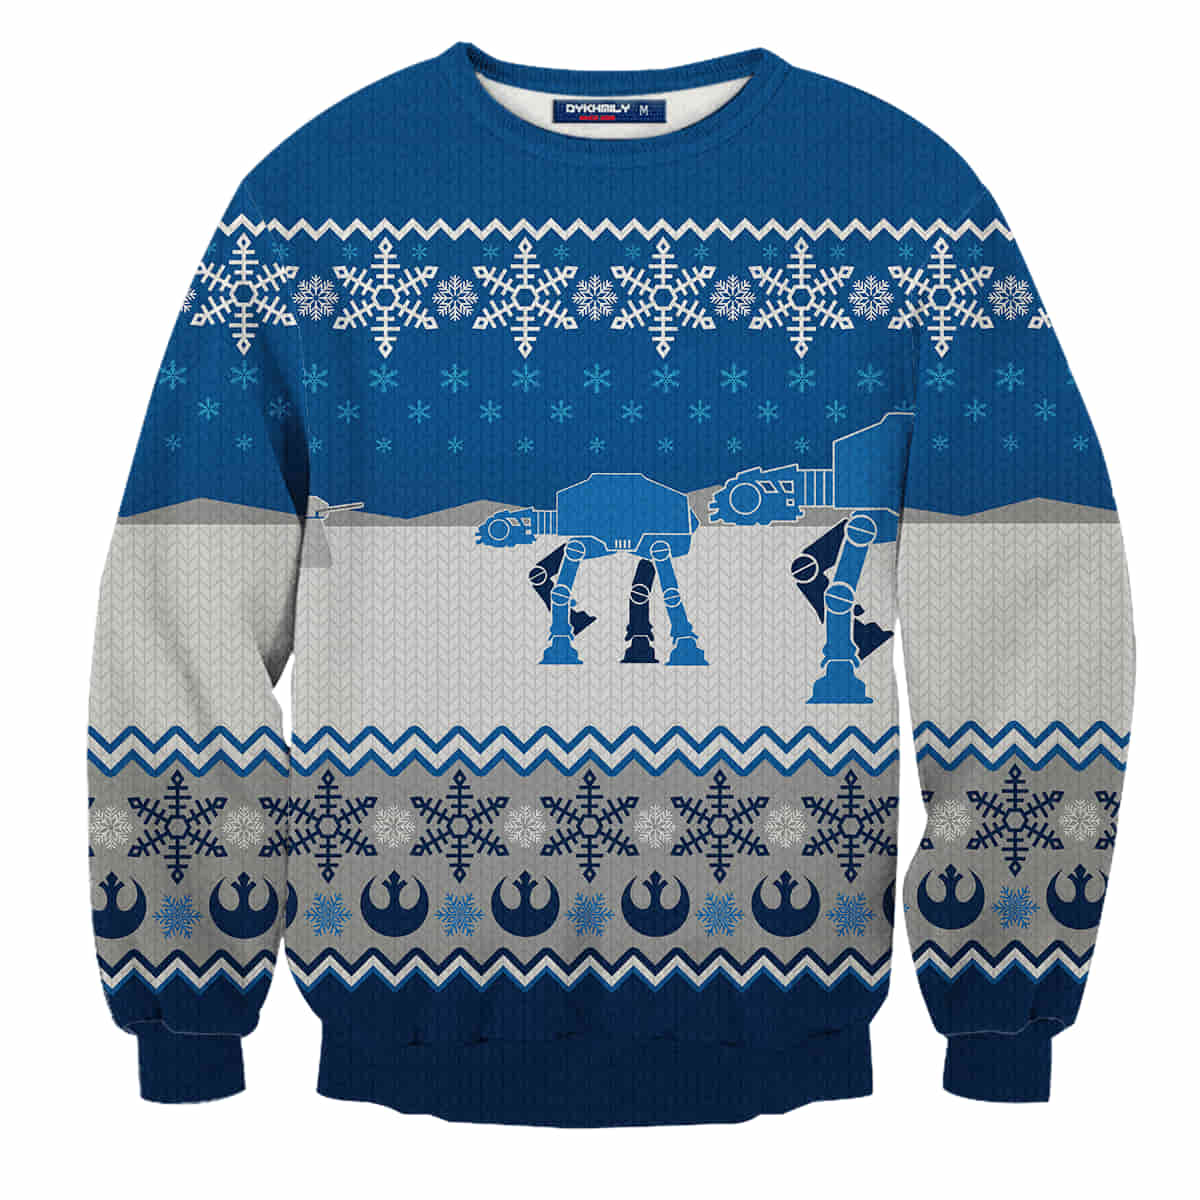 Star Wars Christmas Wool Knitted All Over Print Sweater